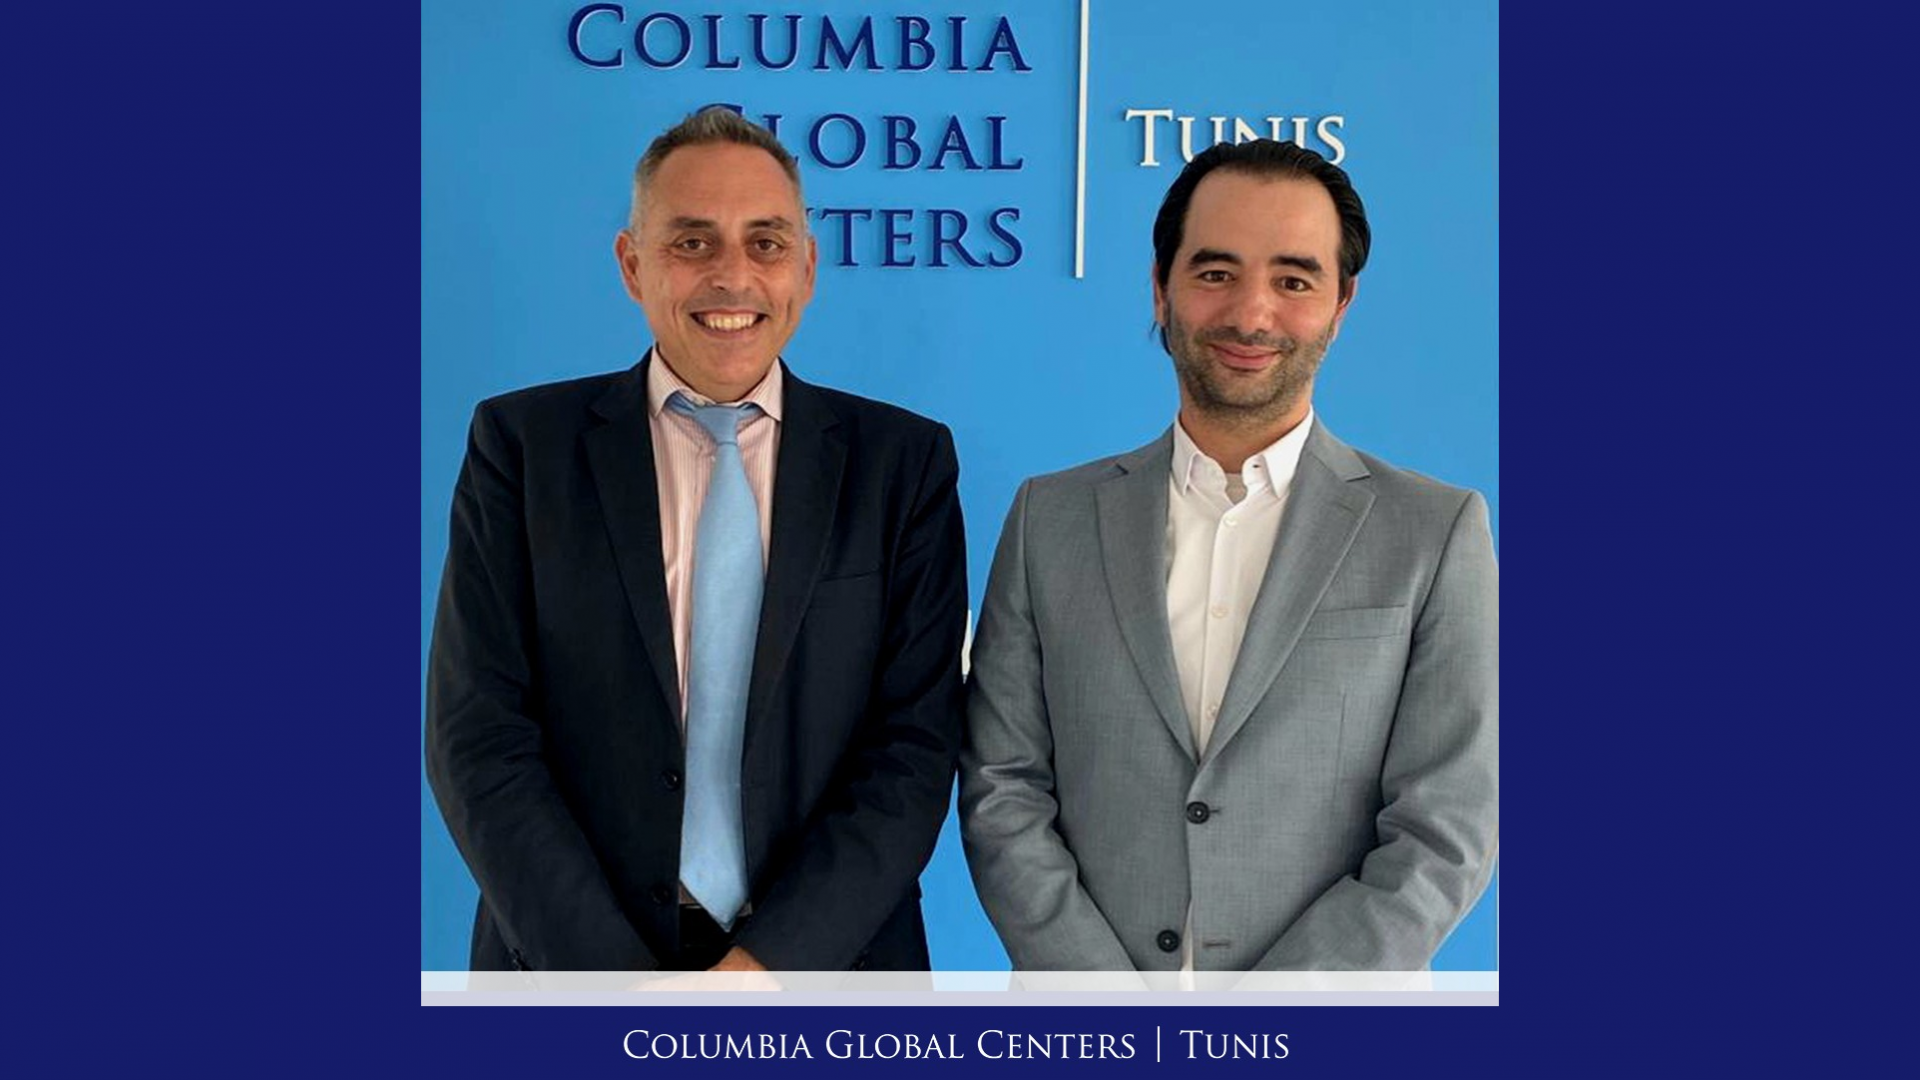 on the left: Germinal Gil de Gracia, Director of Instituto Cervantes Túnez 
on the right:  Youssef Cherif, Director of Columbia Global Centers I Tunis 